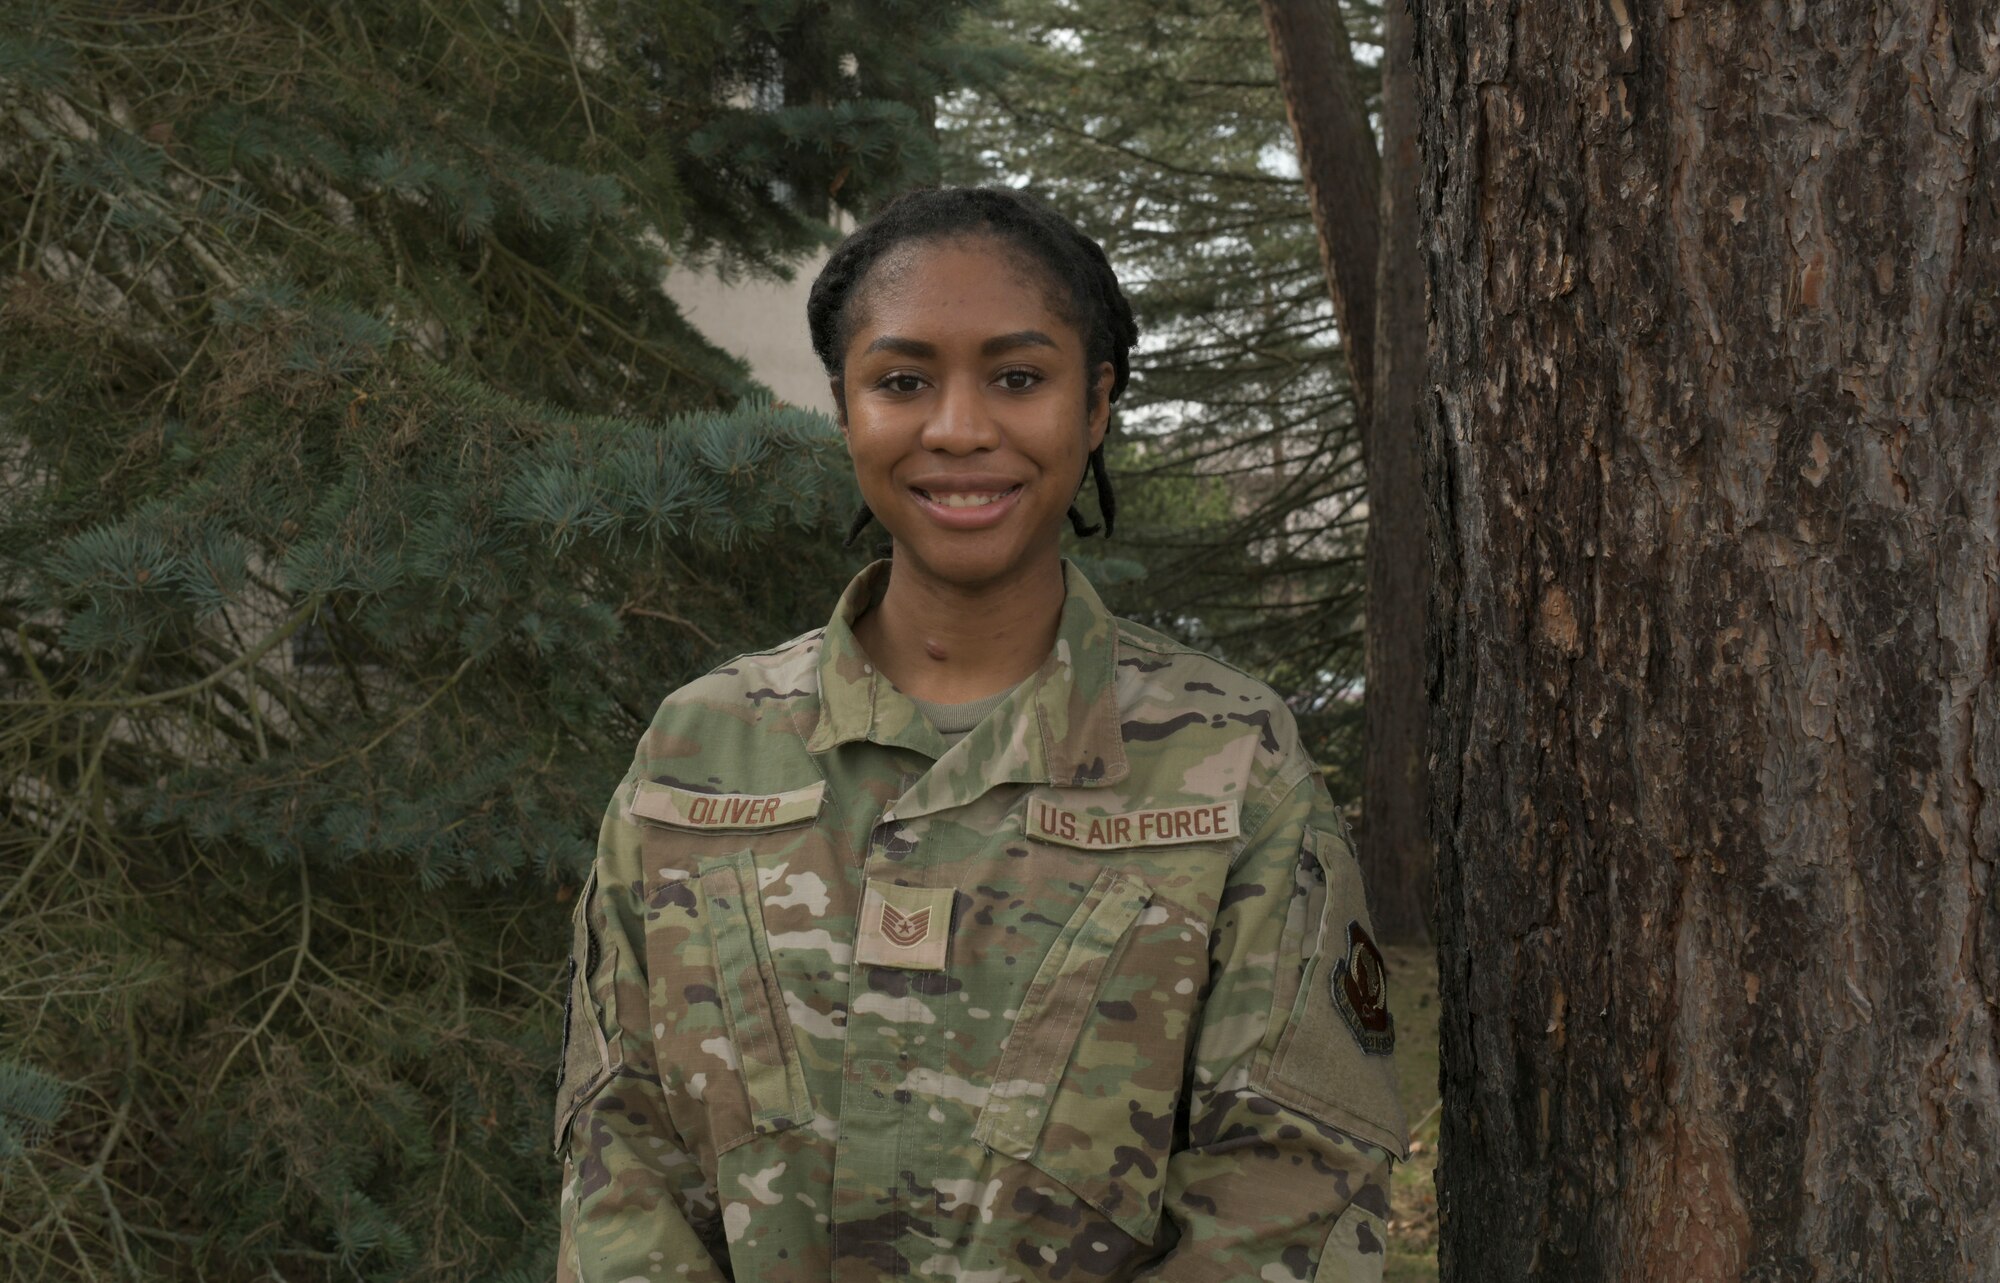 U.S. Air Force Tech. Sgt. Jada Oliver, 435th Air Expeditionary Wing personnel support for contingency operations team member, poses for a photo at Ramstein Air Base, Germany, March 23, 2021. Oliver’s main job duties with PERSCO entail maintaining accountability for members in transit. Some additional duties she has taken on while deployed include tracking members that arrive to Ramstein for medical purposes, and handling most of the Deliberate and Crisis Action Planning and Execution Segments operations involving movement. A personal goal for Oliver is to become a school counselor, while her military goals are to inspire others and to be dependable no matter what rank or position she is given. (U.S. Air Force photo by Senior Airman Gabrielle Winn)